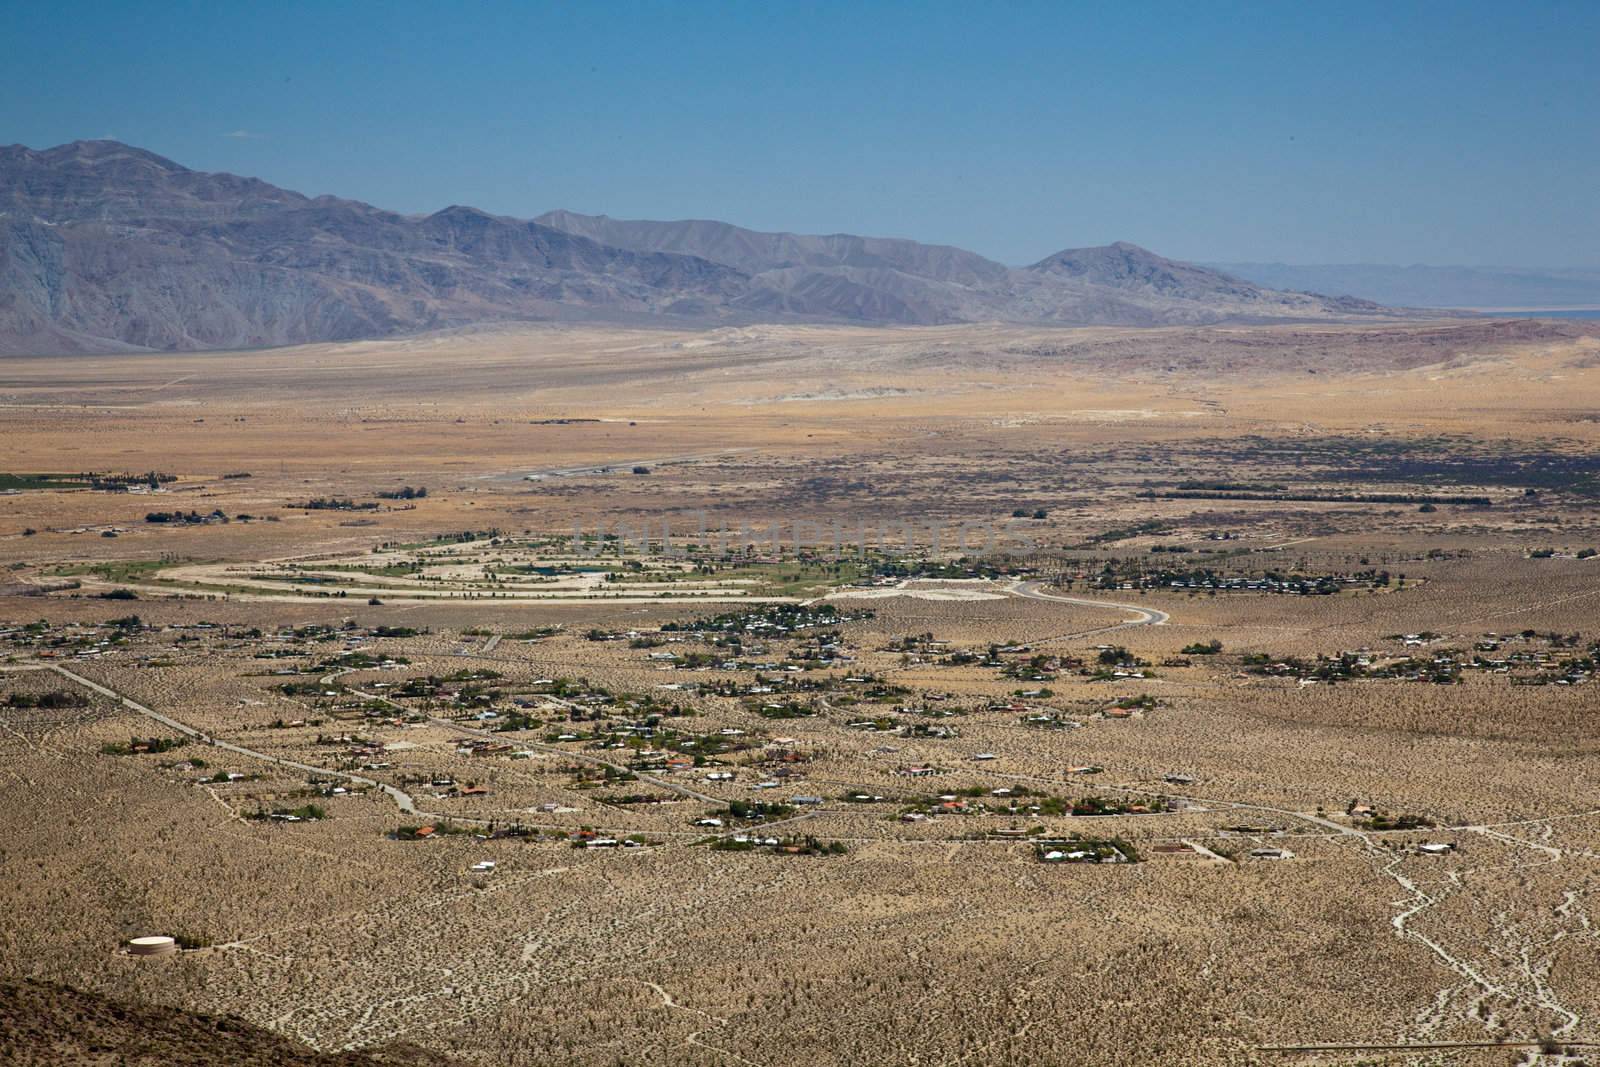 Overview of Borrego Springs in Anza Borrego State Park by steheap